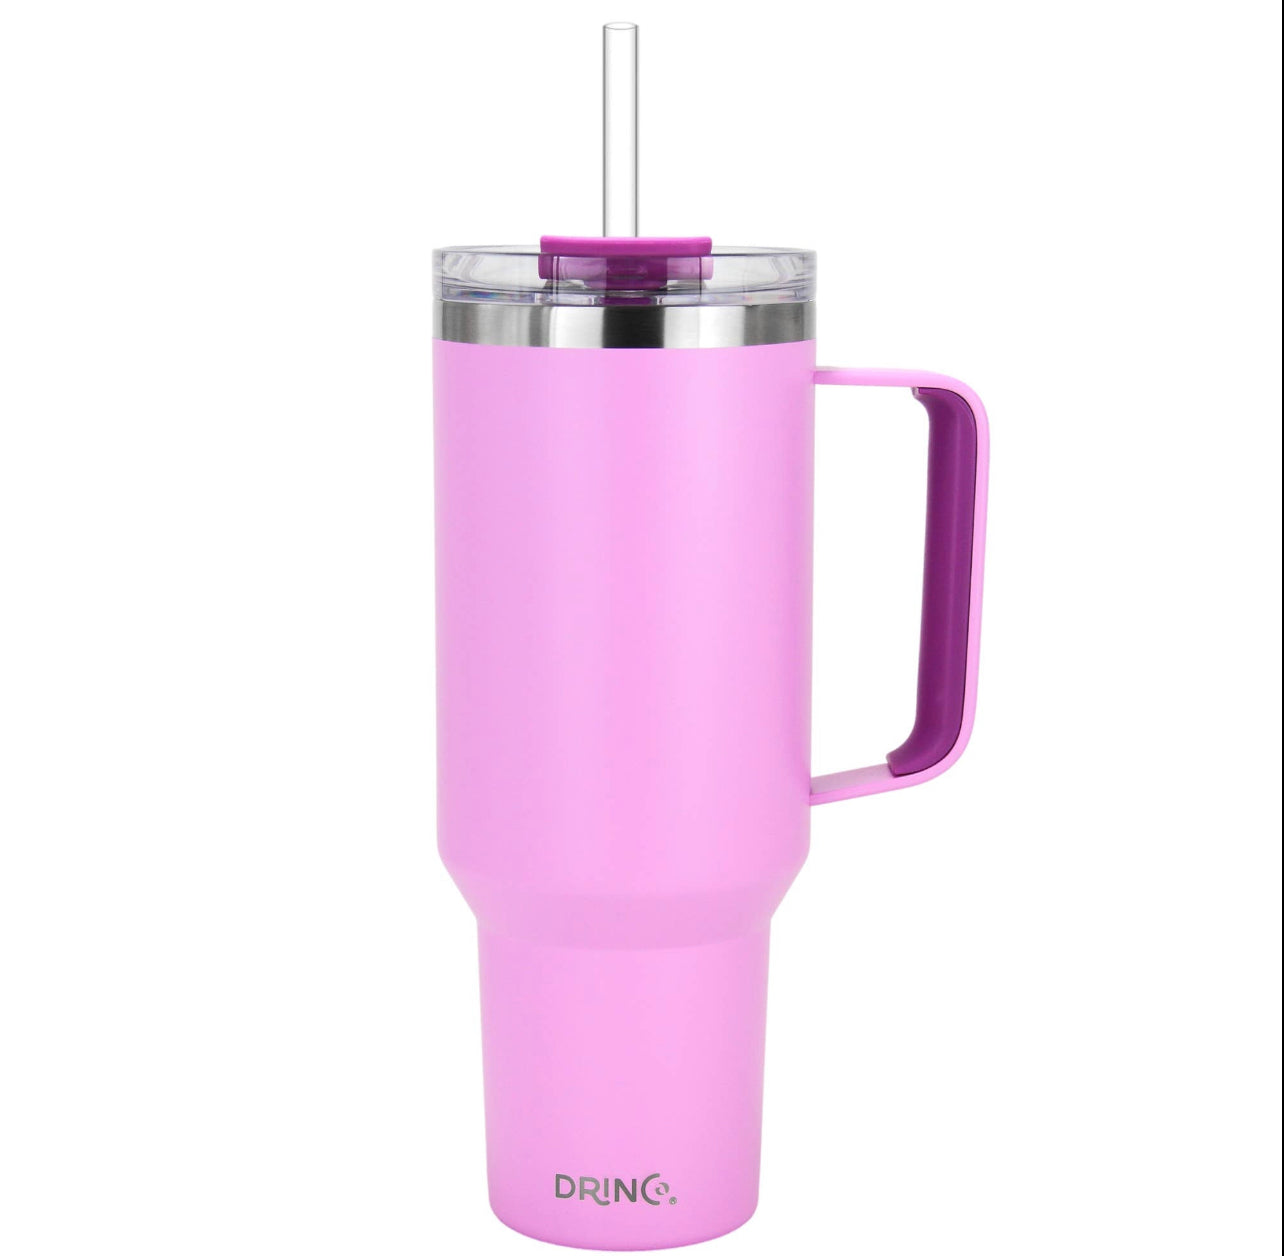 Stanley Dupe 40 oz Stainless Steel Tumbler in Fushia – The